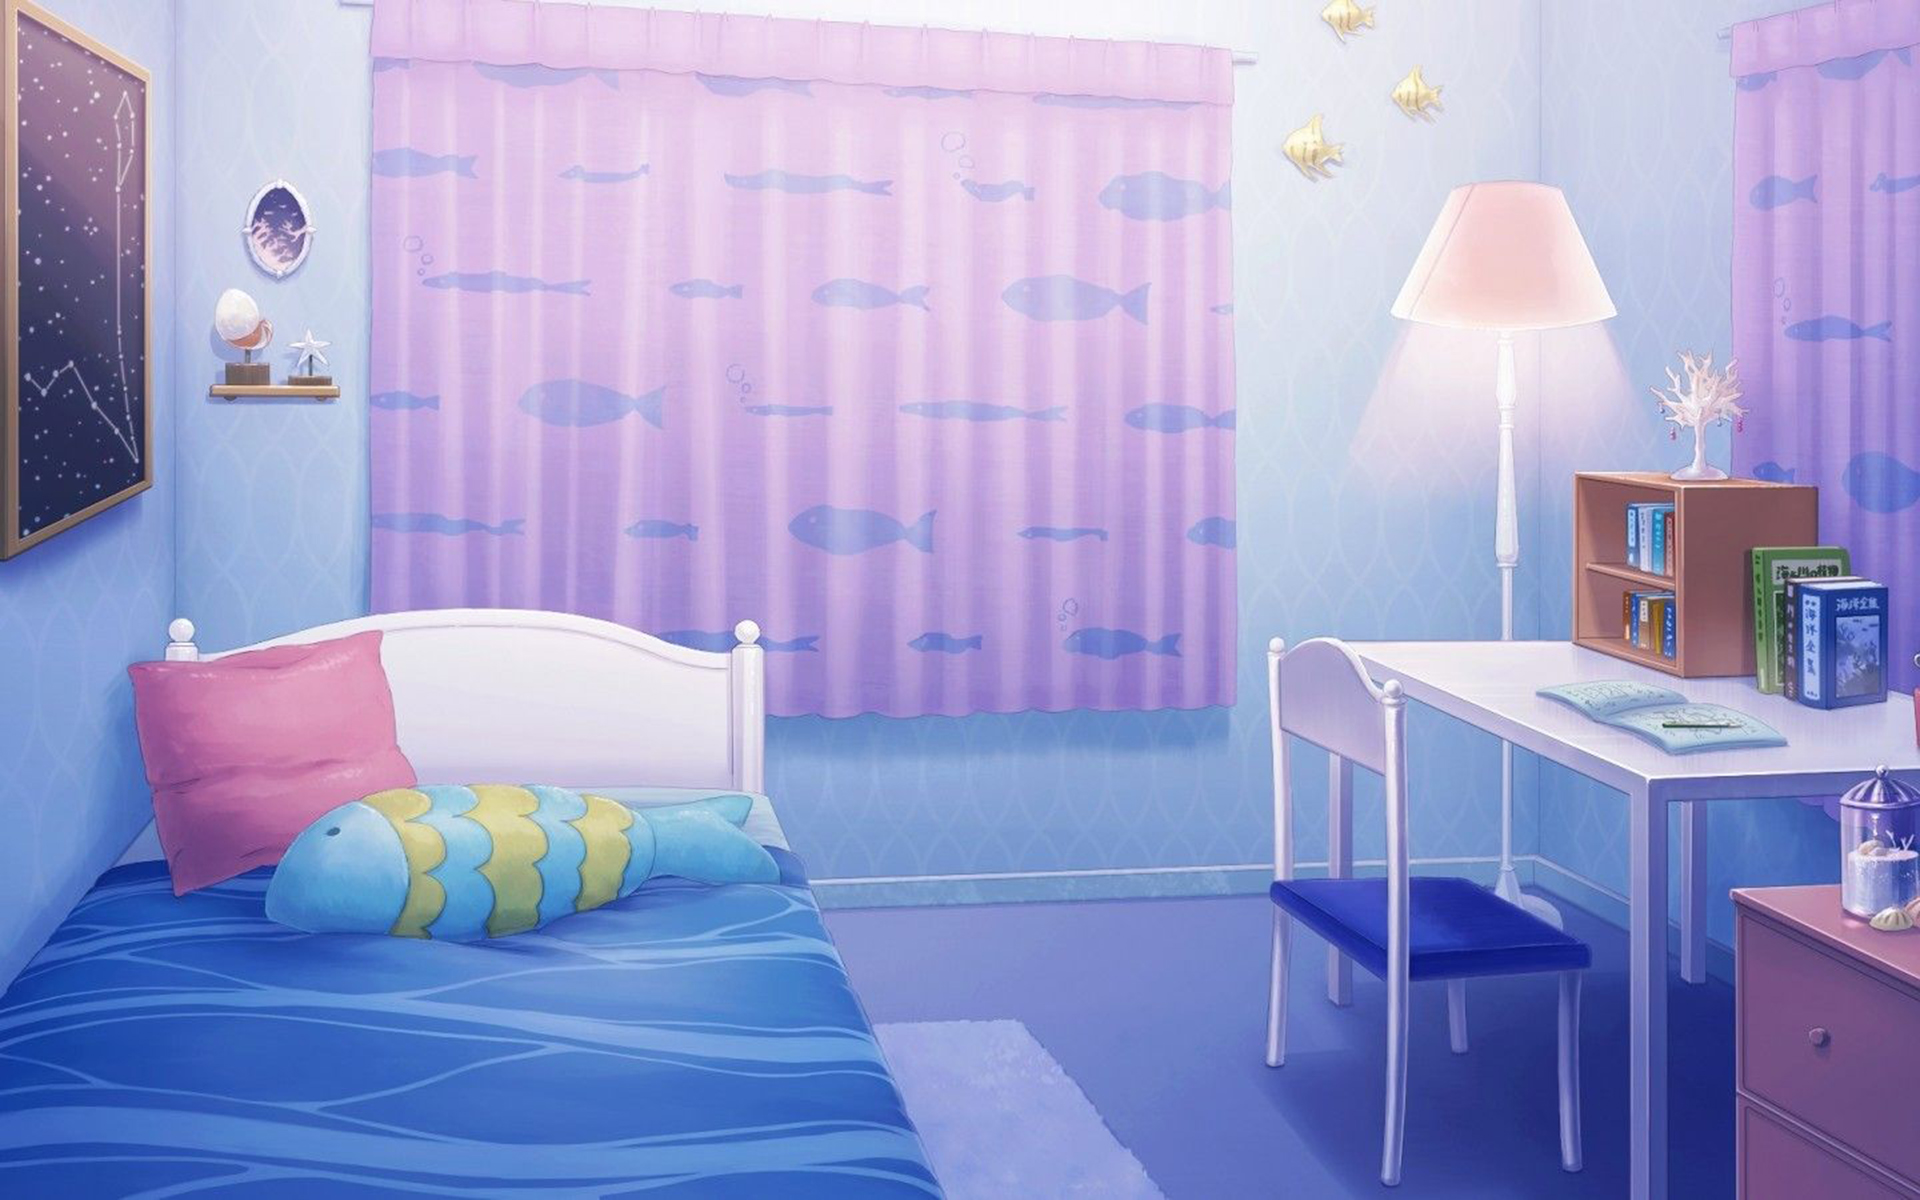 Download Aesthetic Anime Bedroom Ideal for Relaxation  Wallpaperscom